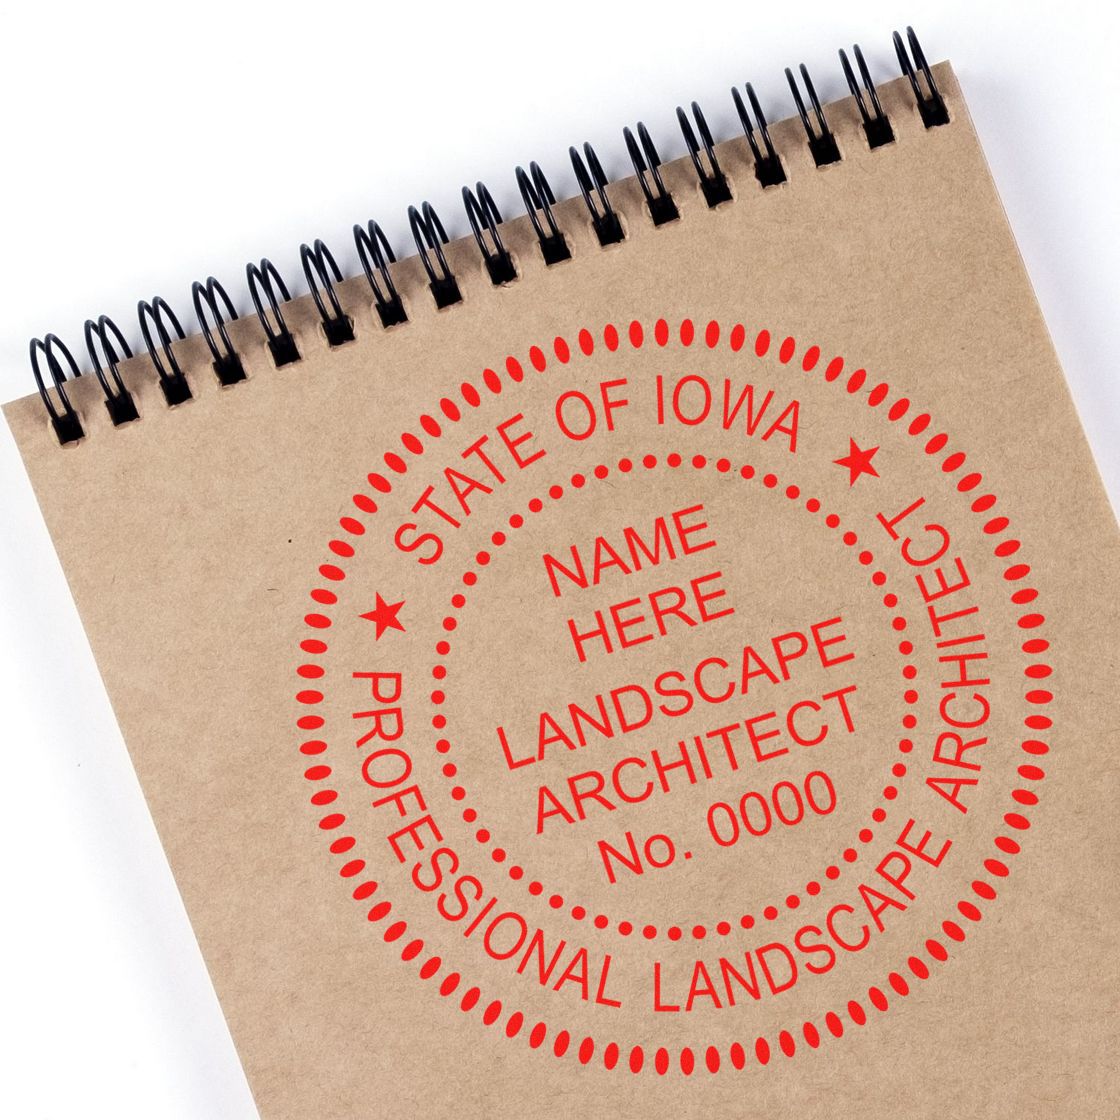 An alternative view of the Premium MaxLight Pre-Inked Iowa Landscape Architectural Stamp stamped on a sheet of paper showing the image in use